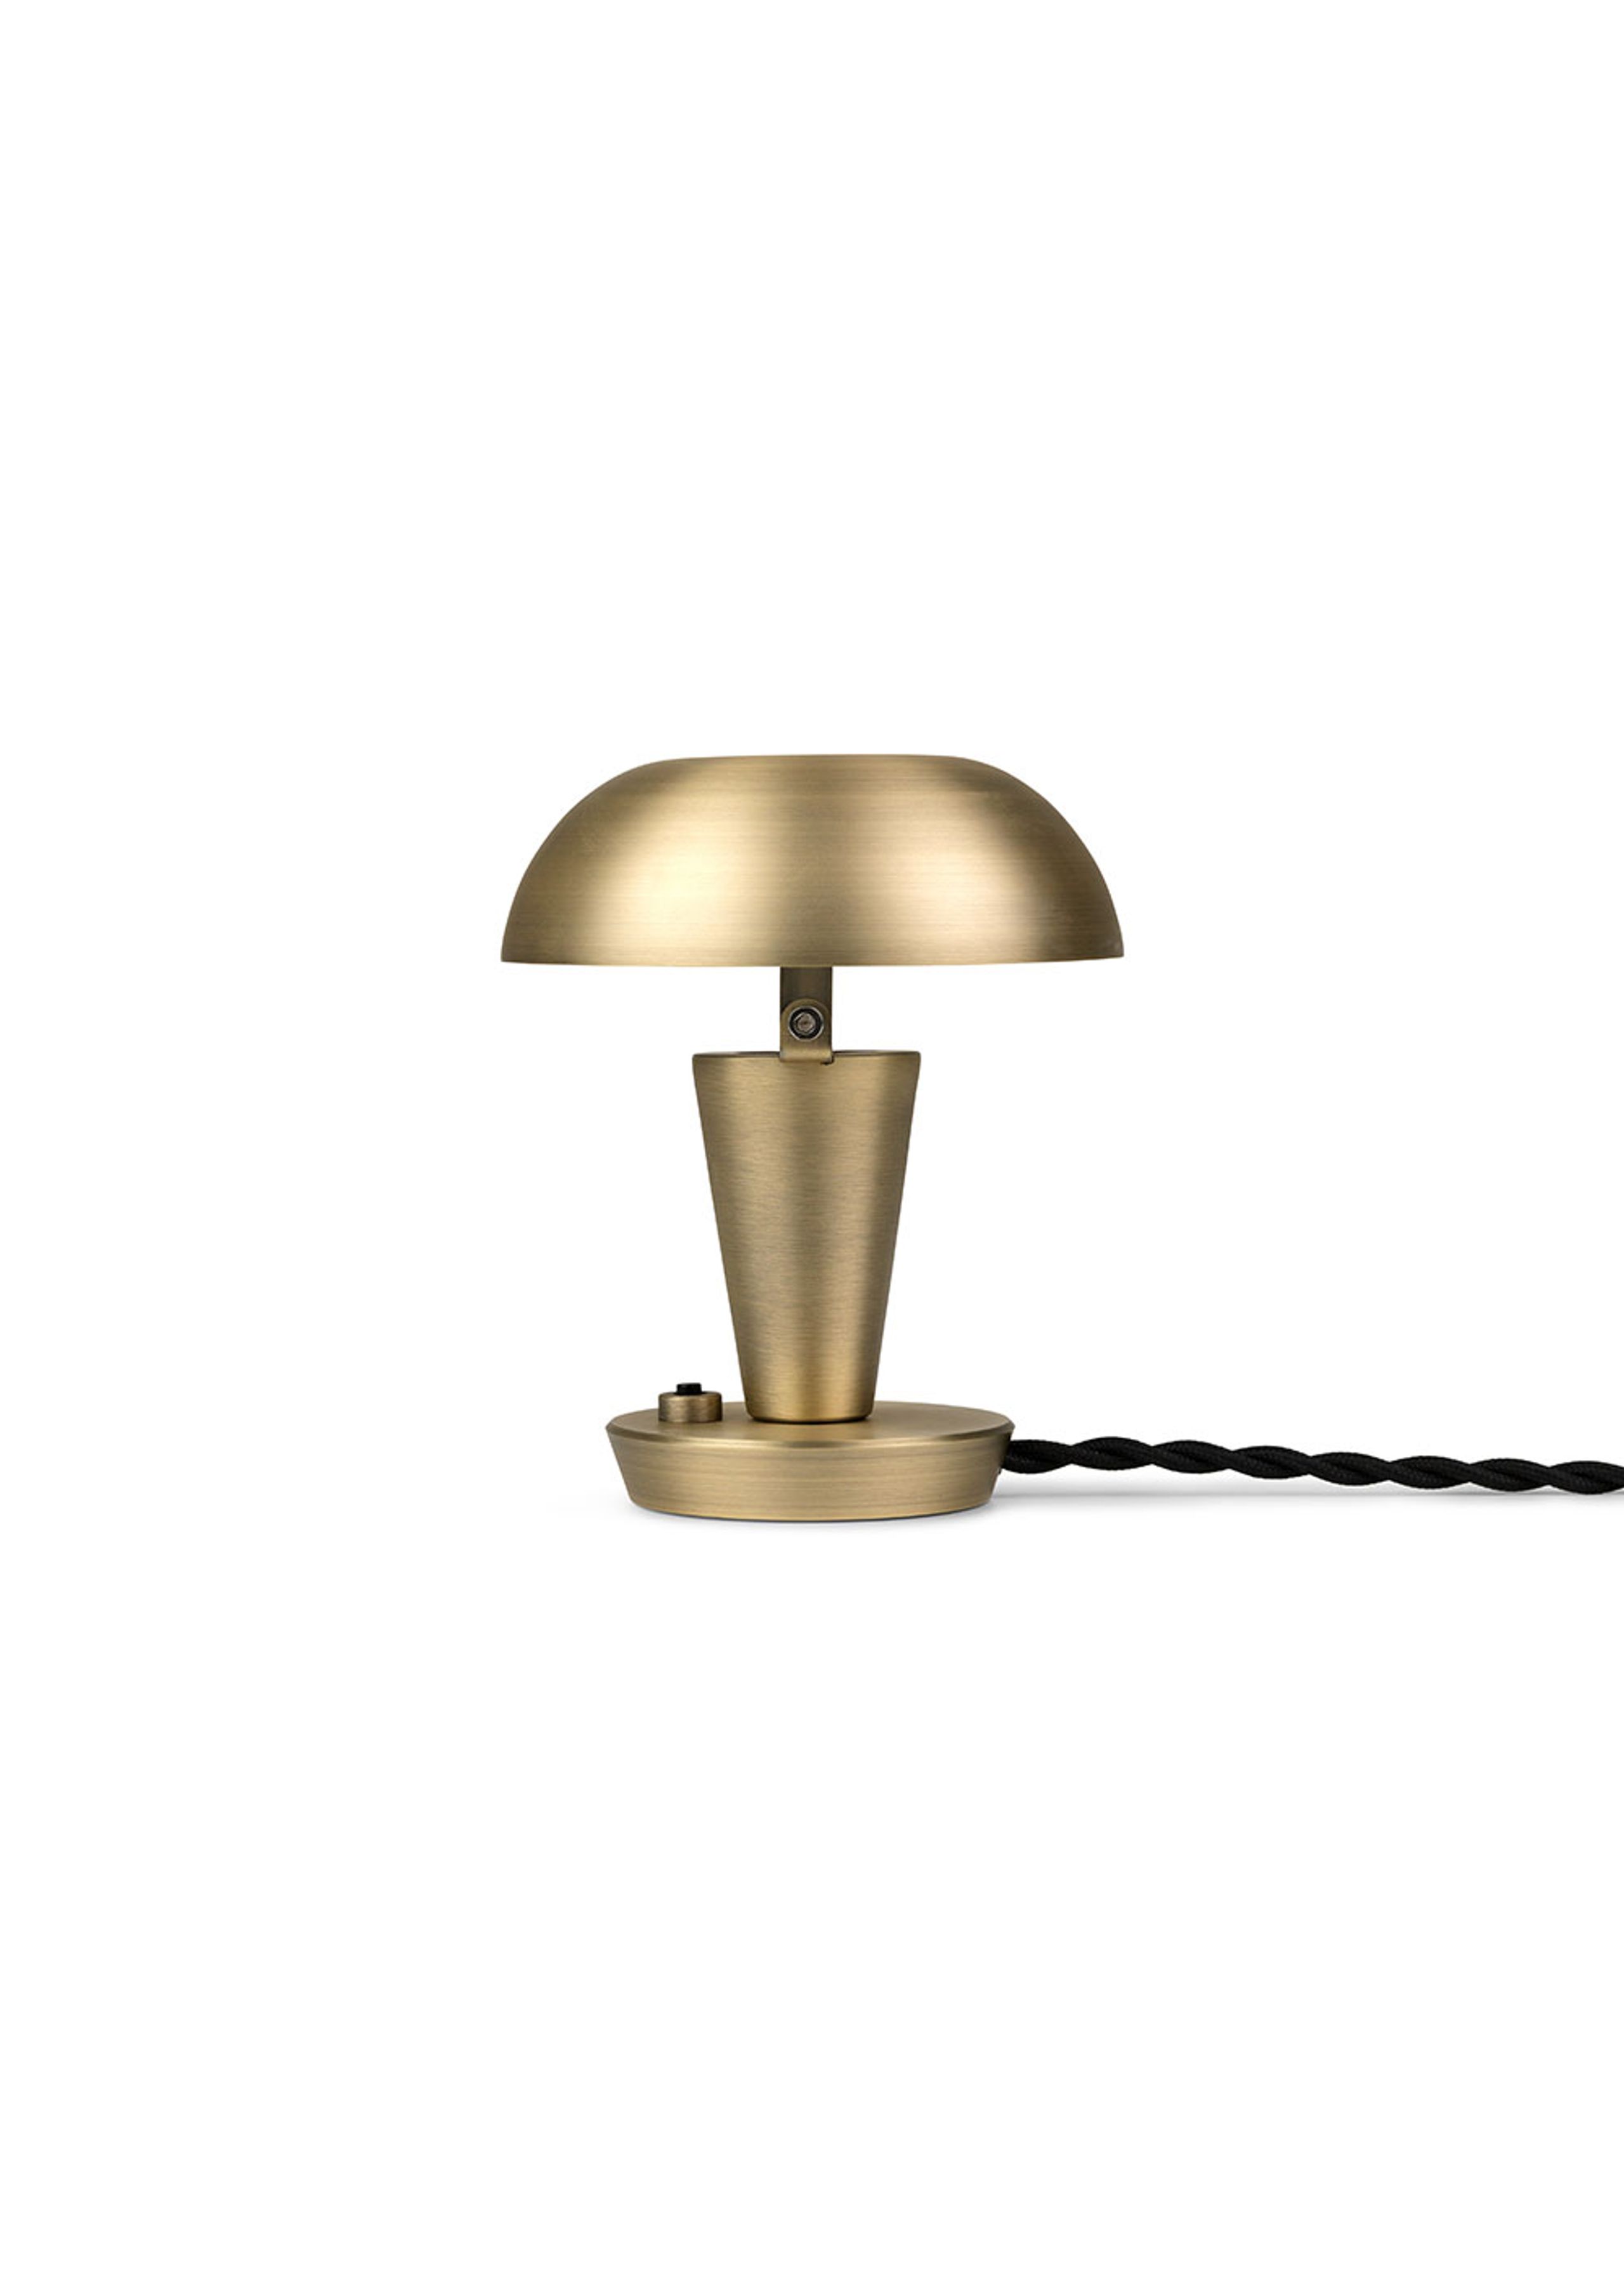 https://images.byflou.com/13/3/images/products/0/0/ferm-living-bordlampe-tiny-table-lamp-small-brass-3320928.jpeg